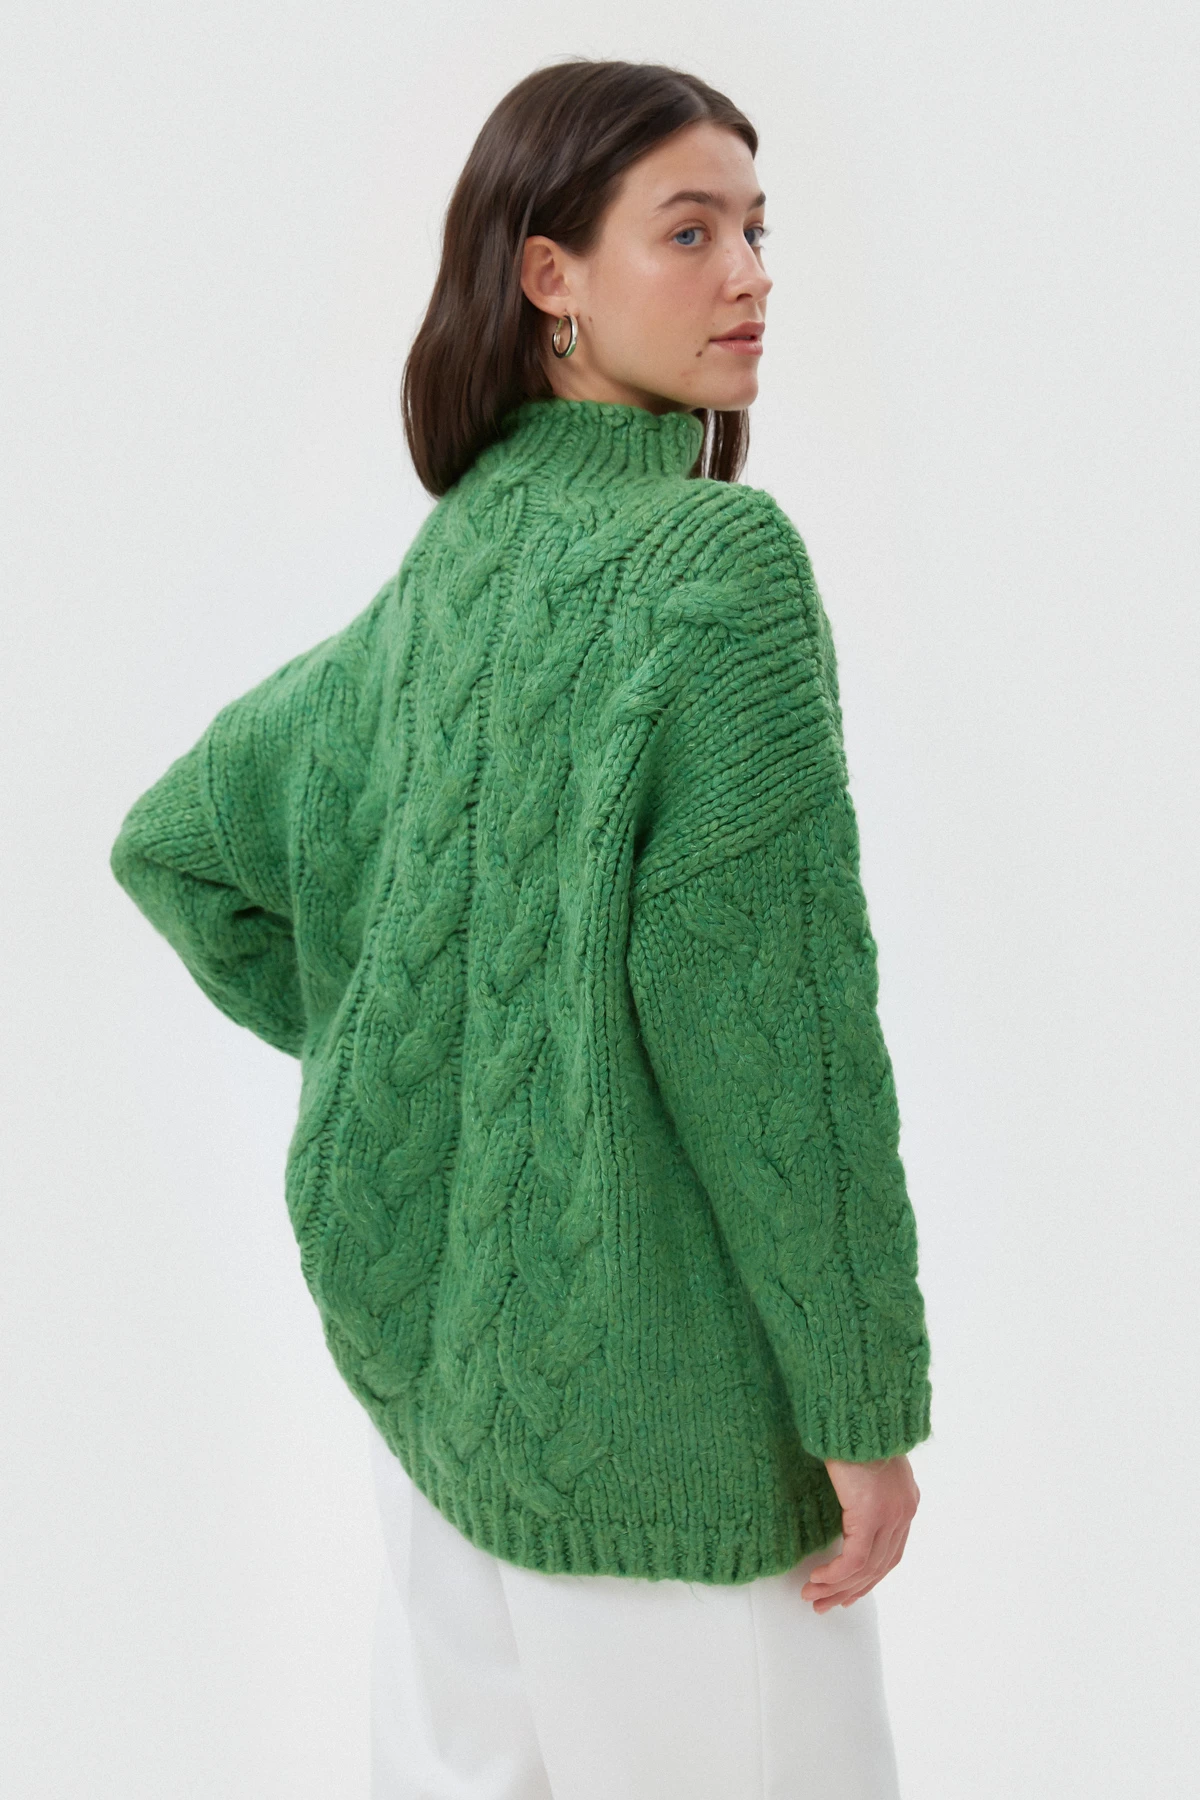 Green elongated sweater in "braids" with cotton, photo 6